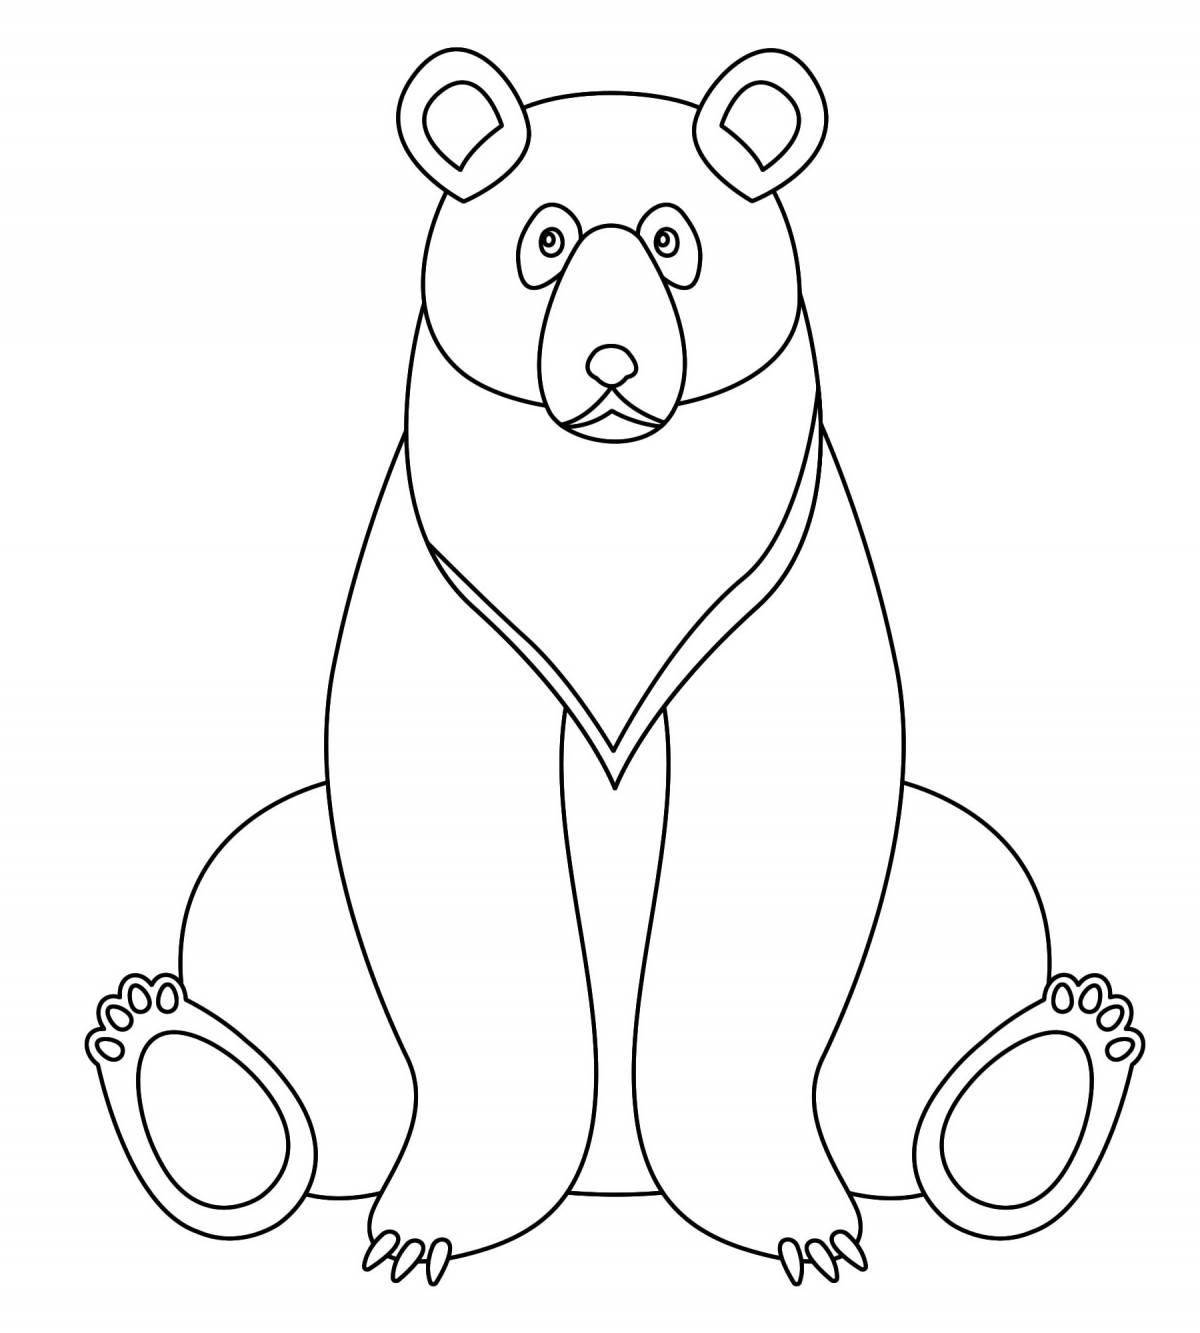 Adorable bear coloring book for children 5-6 years old